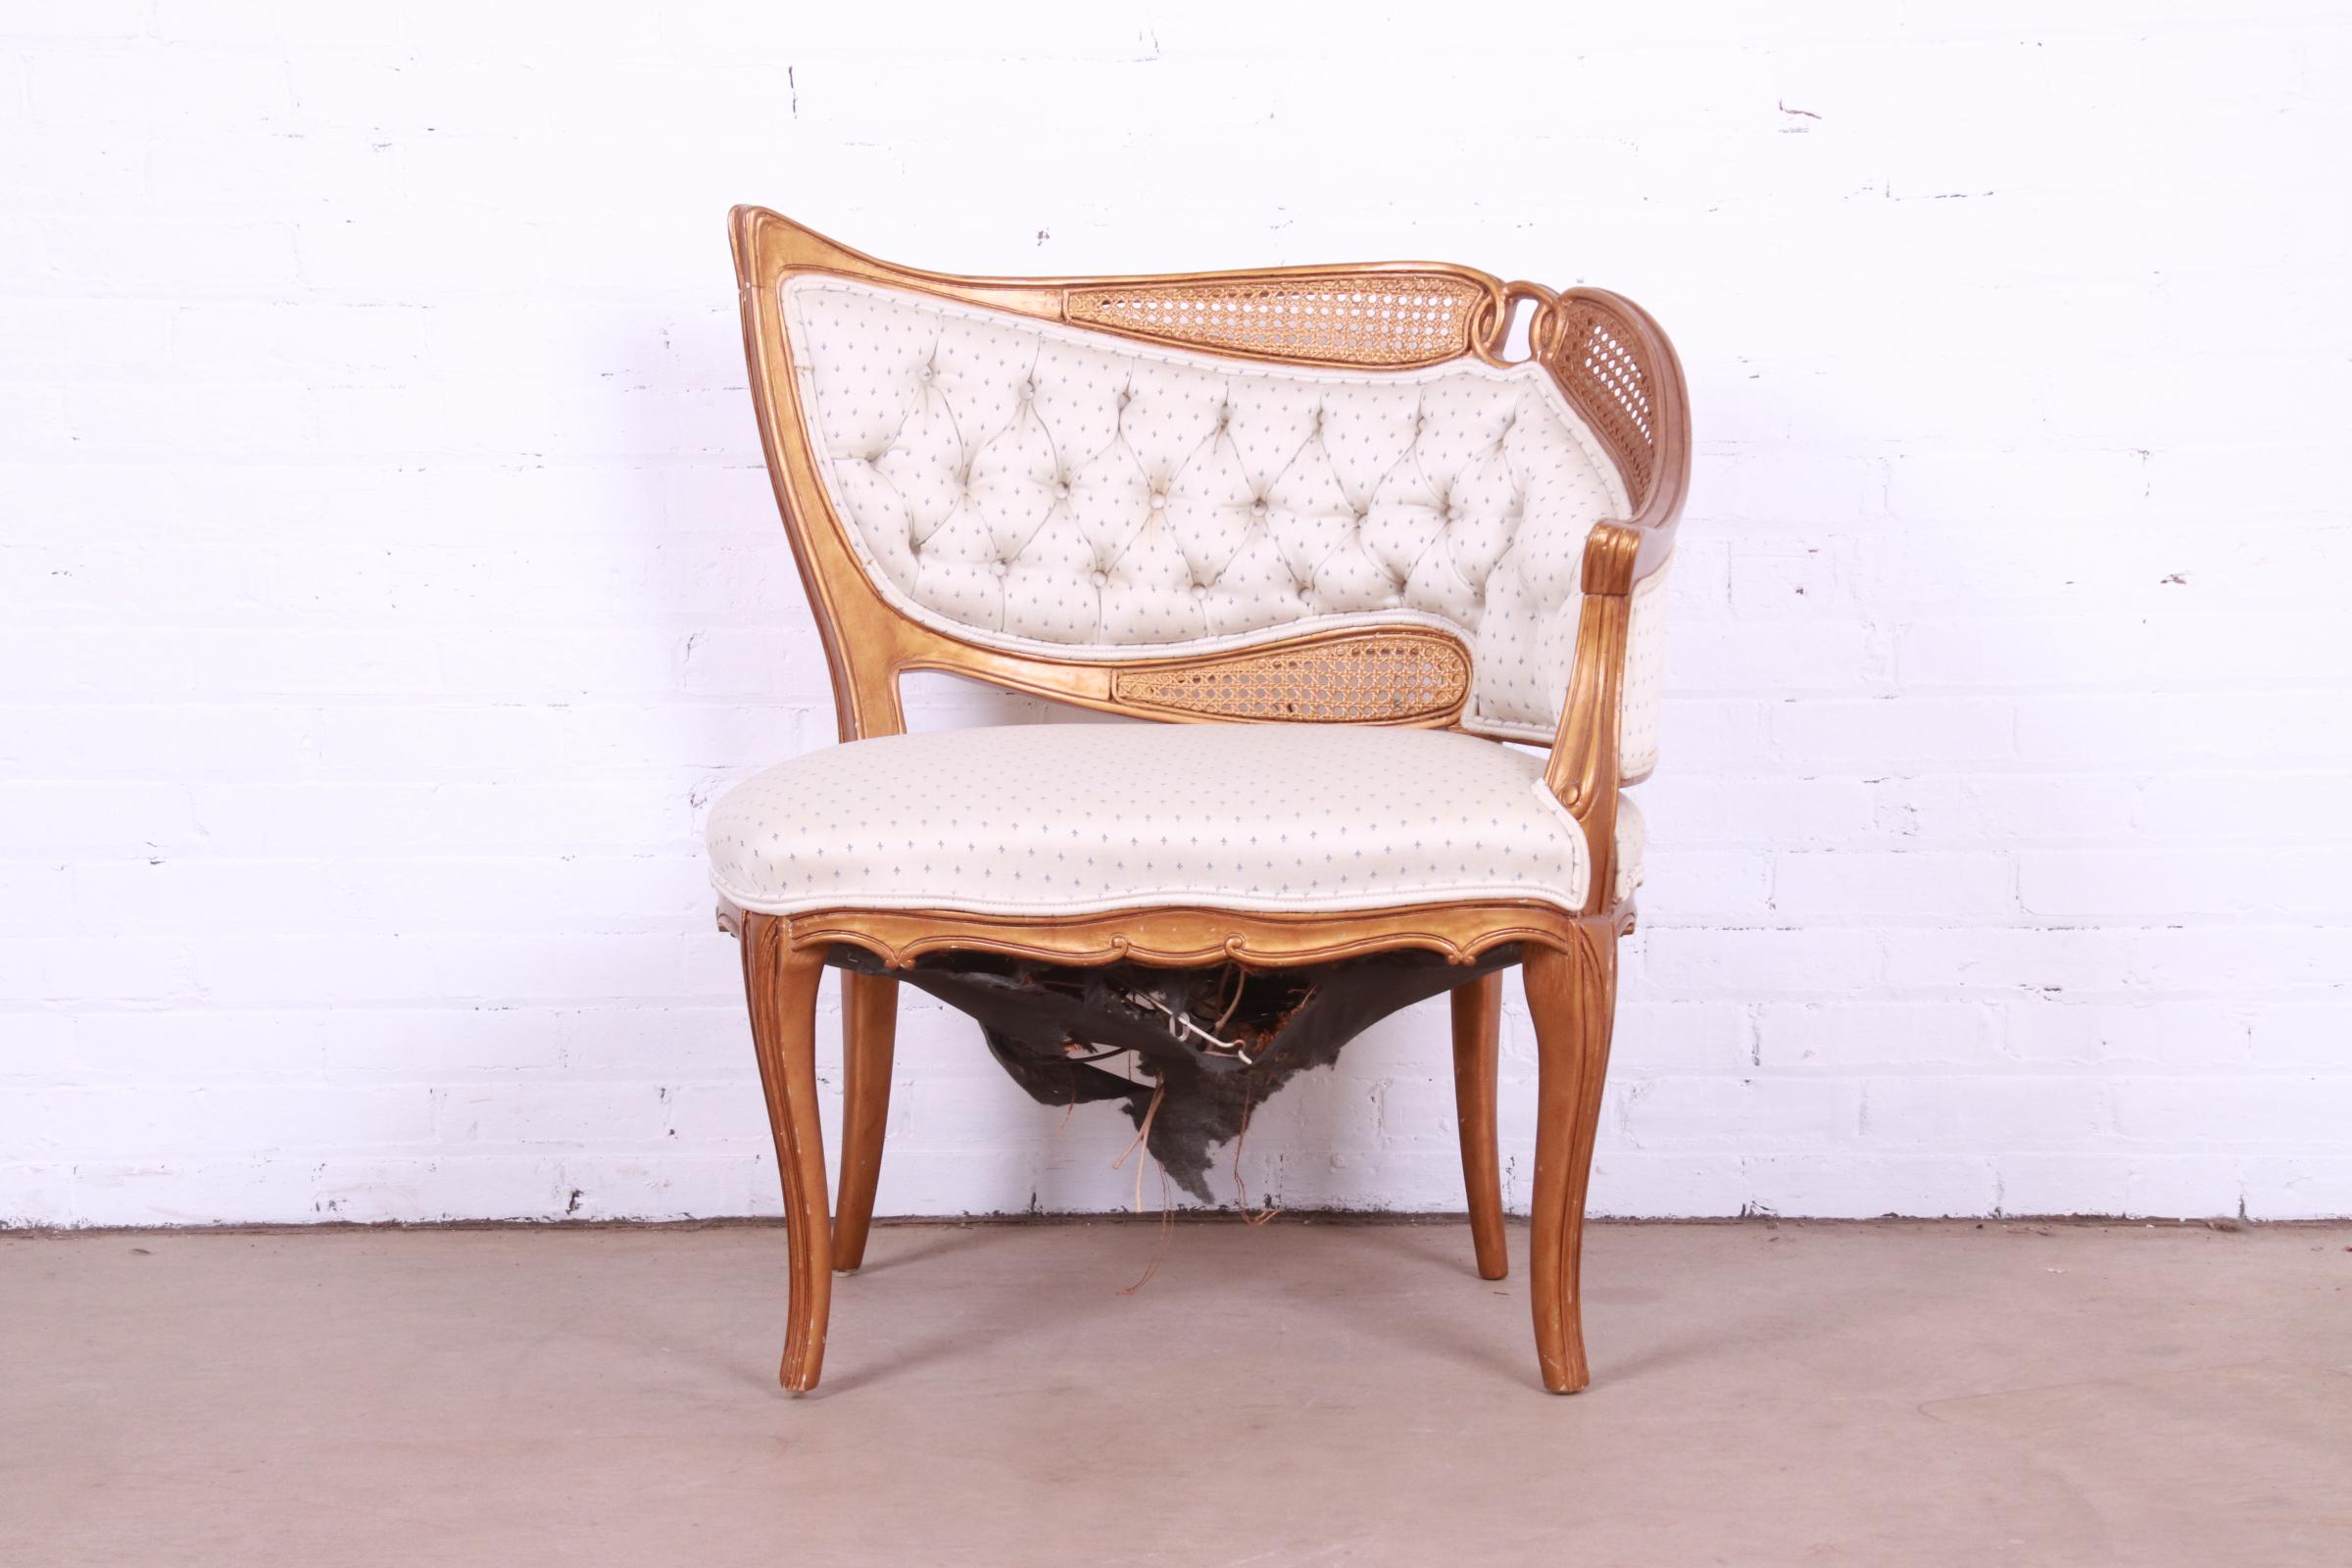 20th Century French Rococo Louis XV Giltwood and Cane Upholstered Fireside Chair